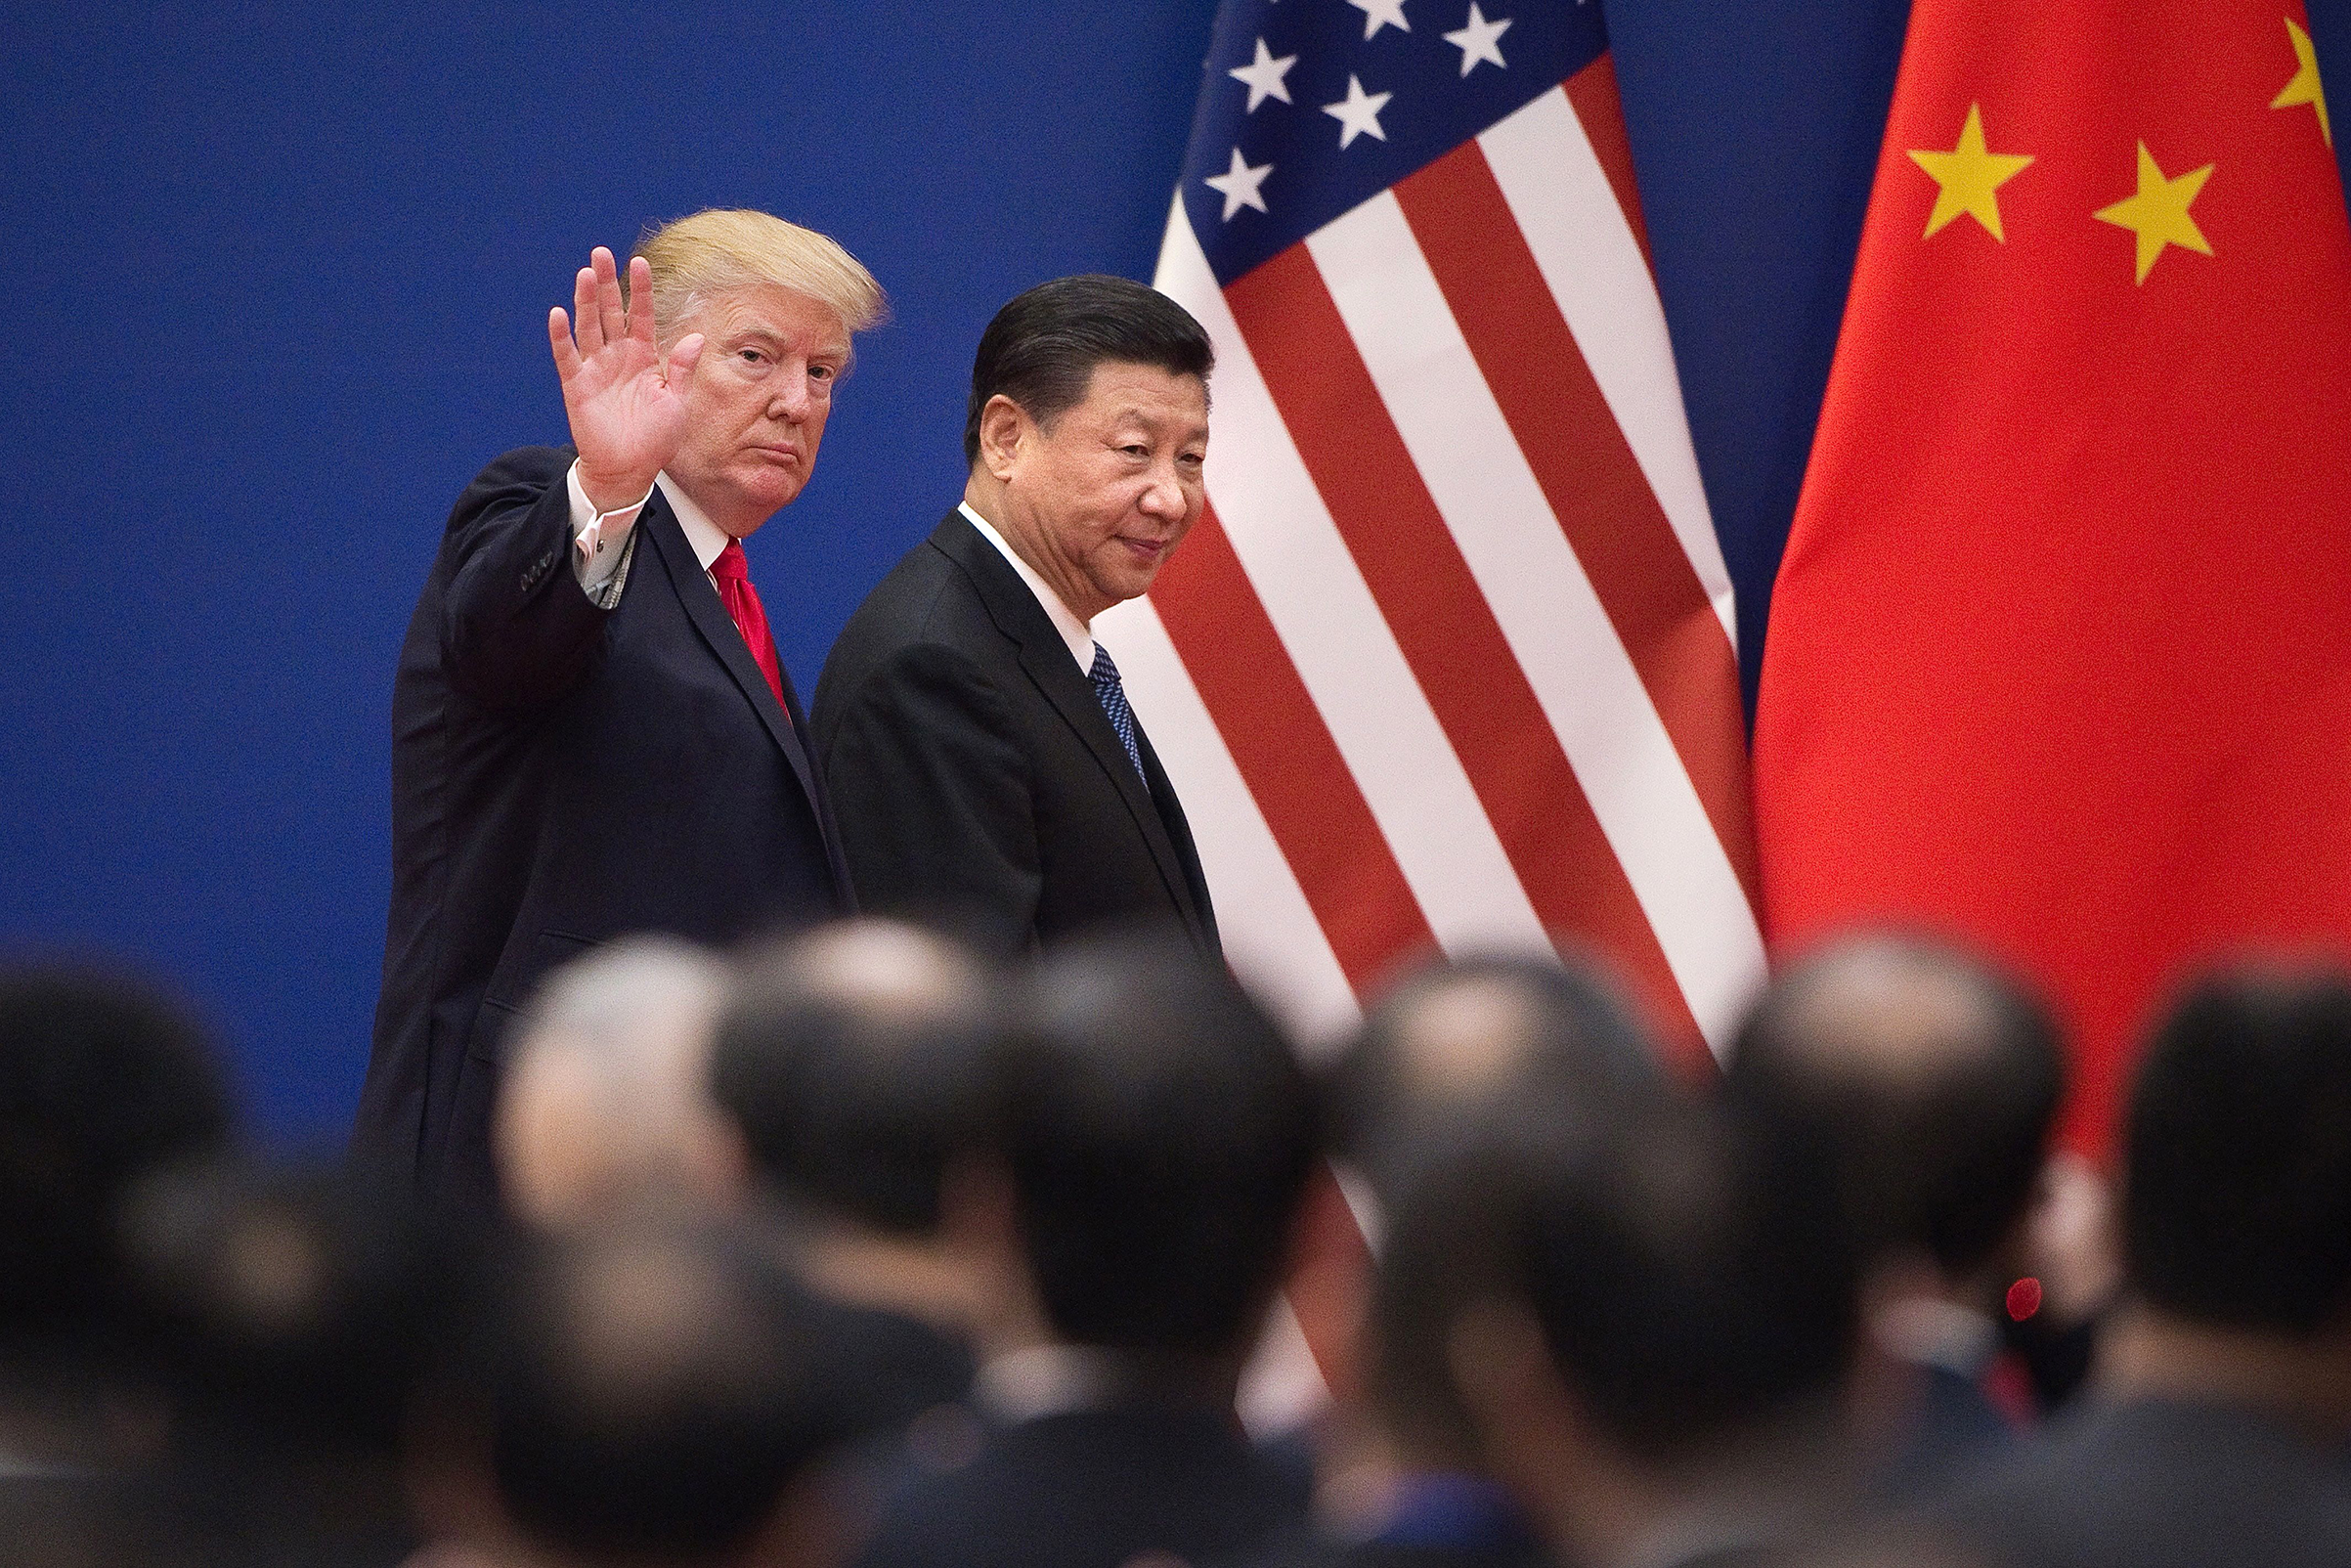 President Donald Trump and China's President Xi Jinping at the Great Hall of the People in Beijing on Nov. 9, 2017. (Nicolas Asfouri—AFP/Getty Images)